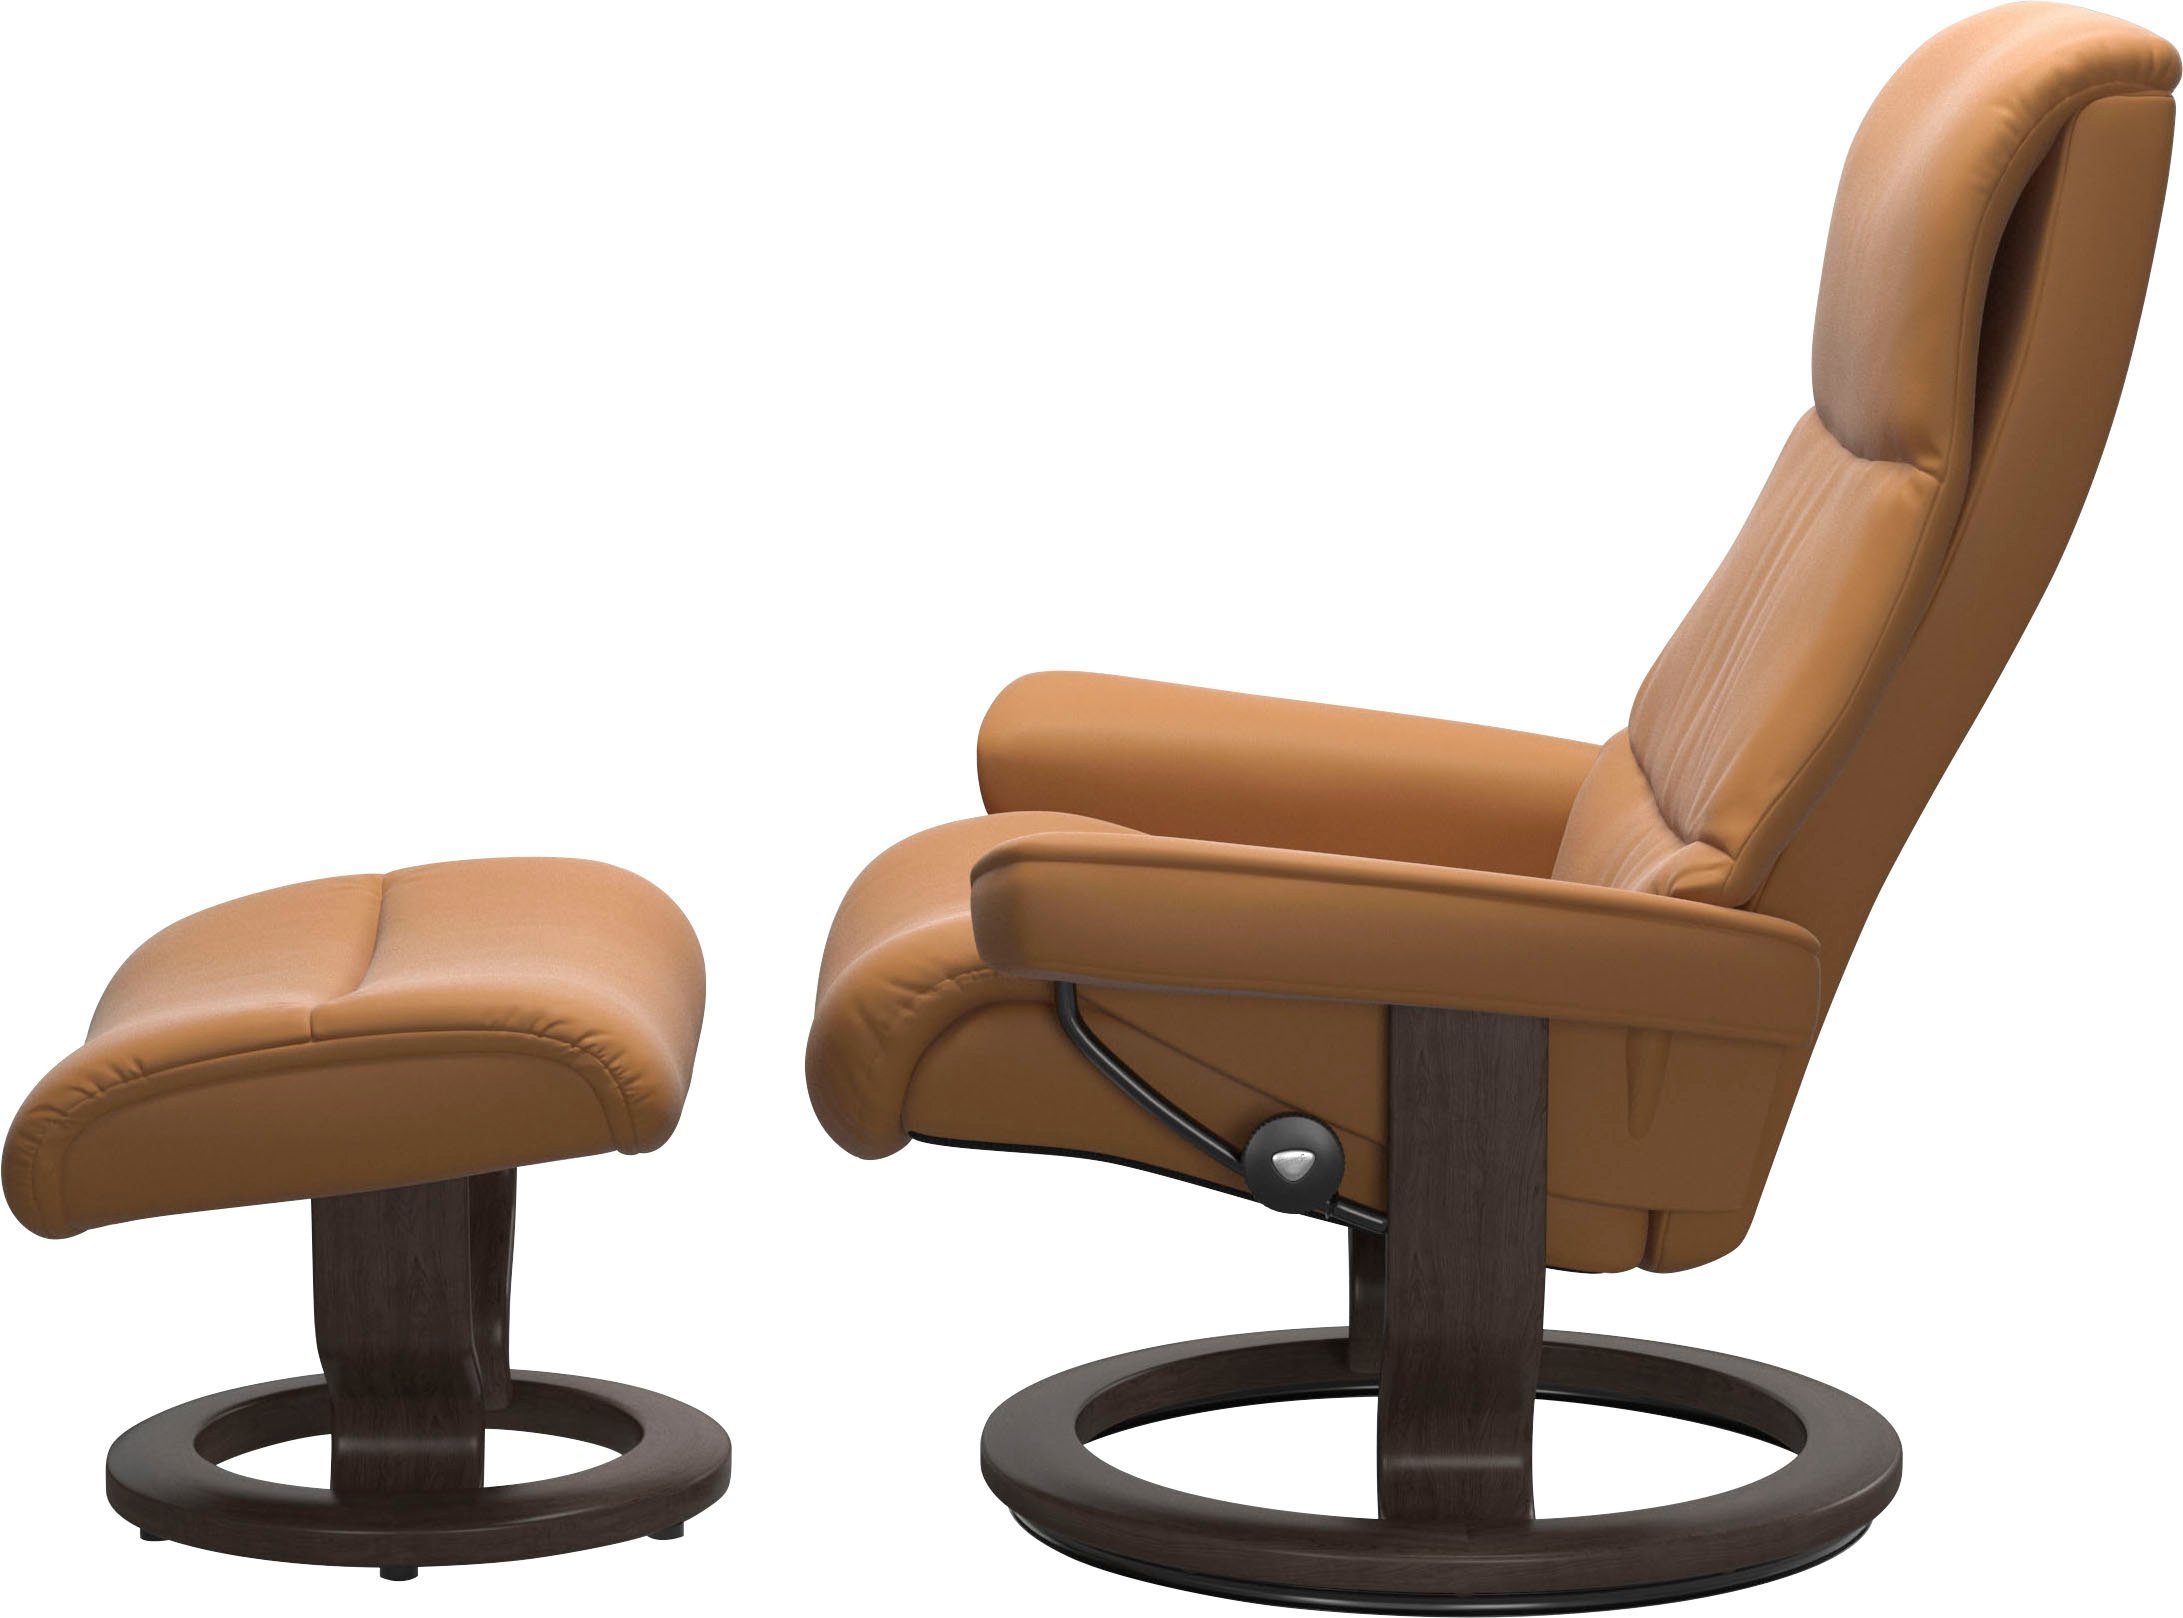 M,Gestell Größe Stressless® Wenge Base, View, Classic mit Relaxsessel